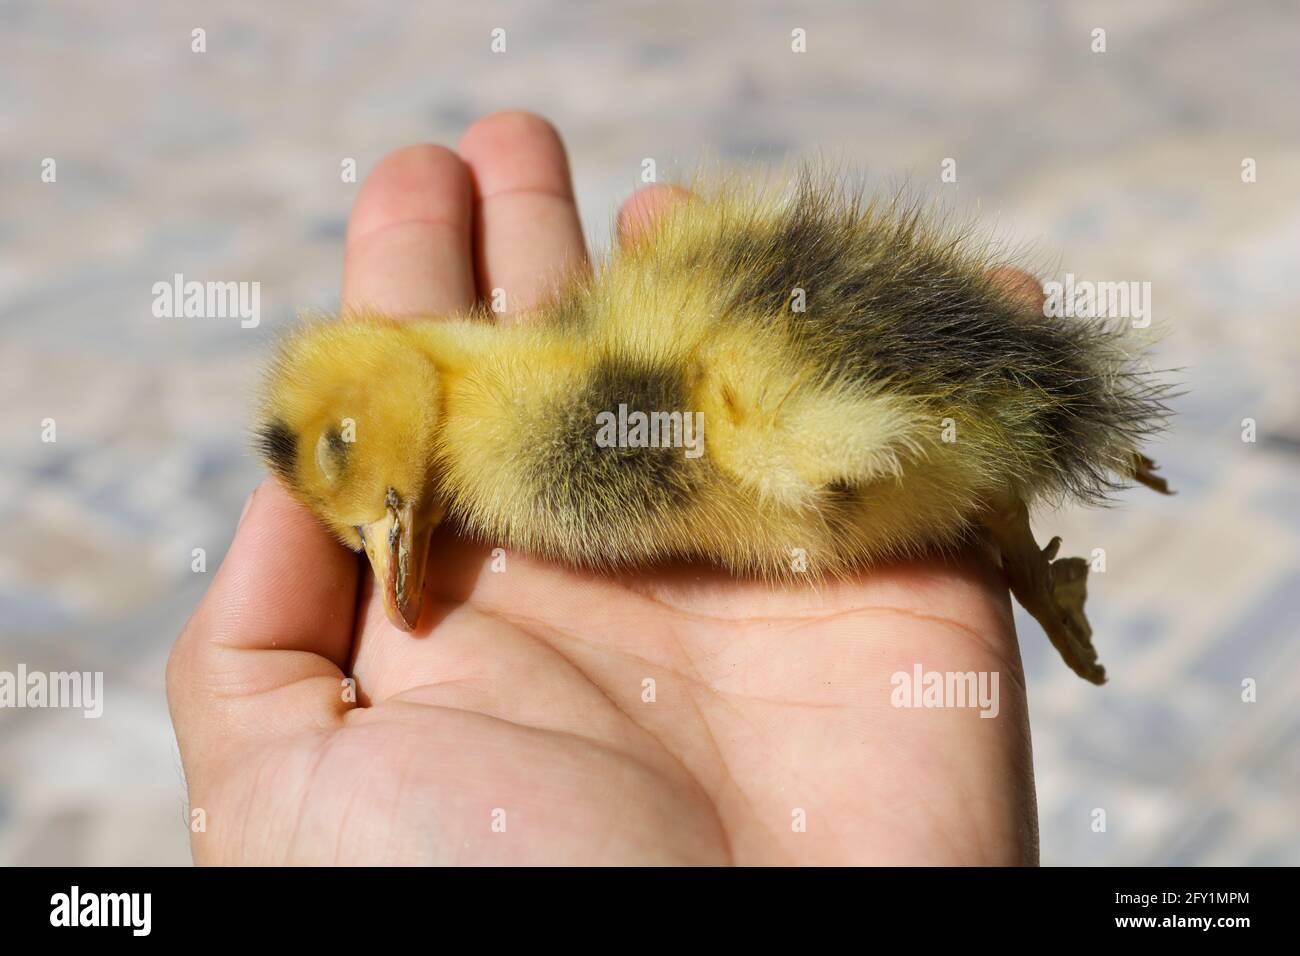 Died Chick of Duck in hand, Died Baby duck, Died duckling Stock Photo